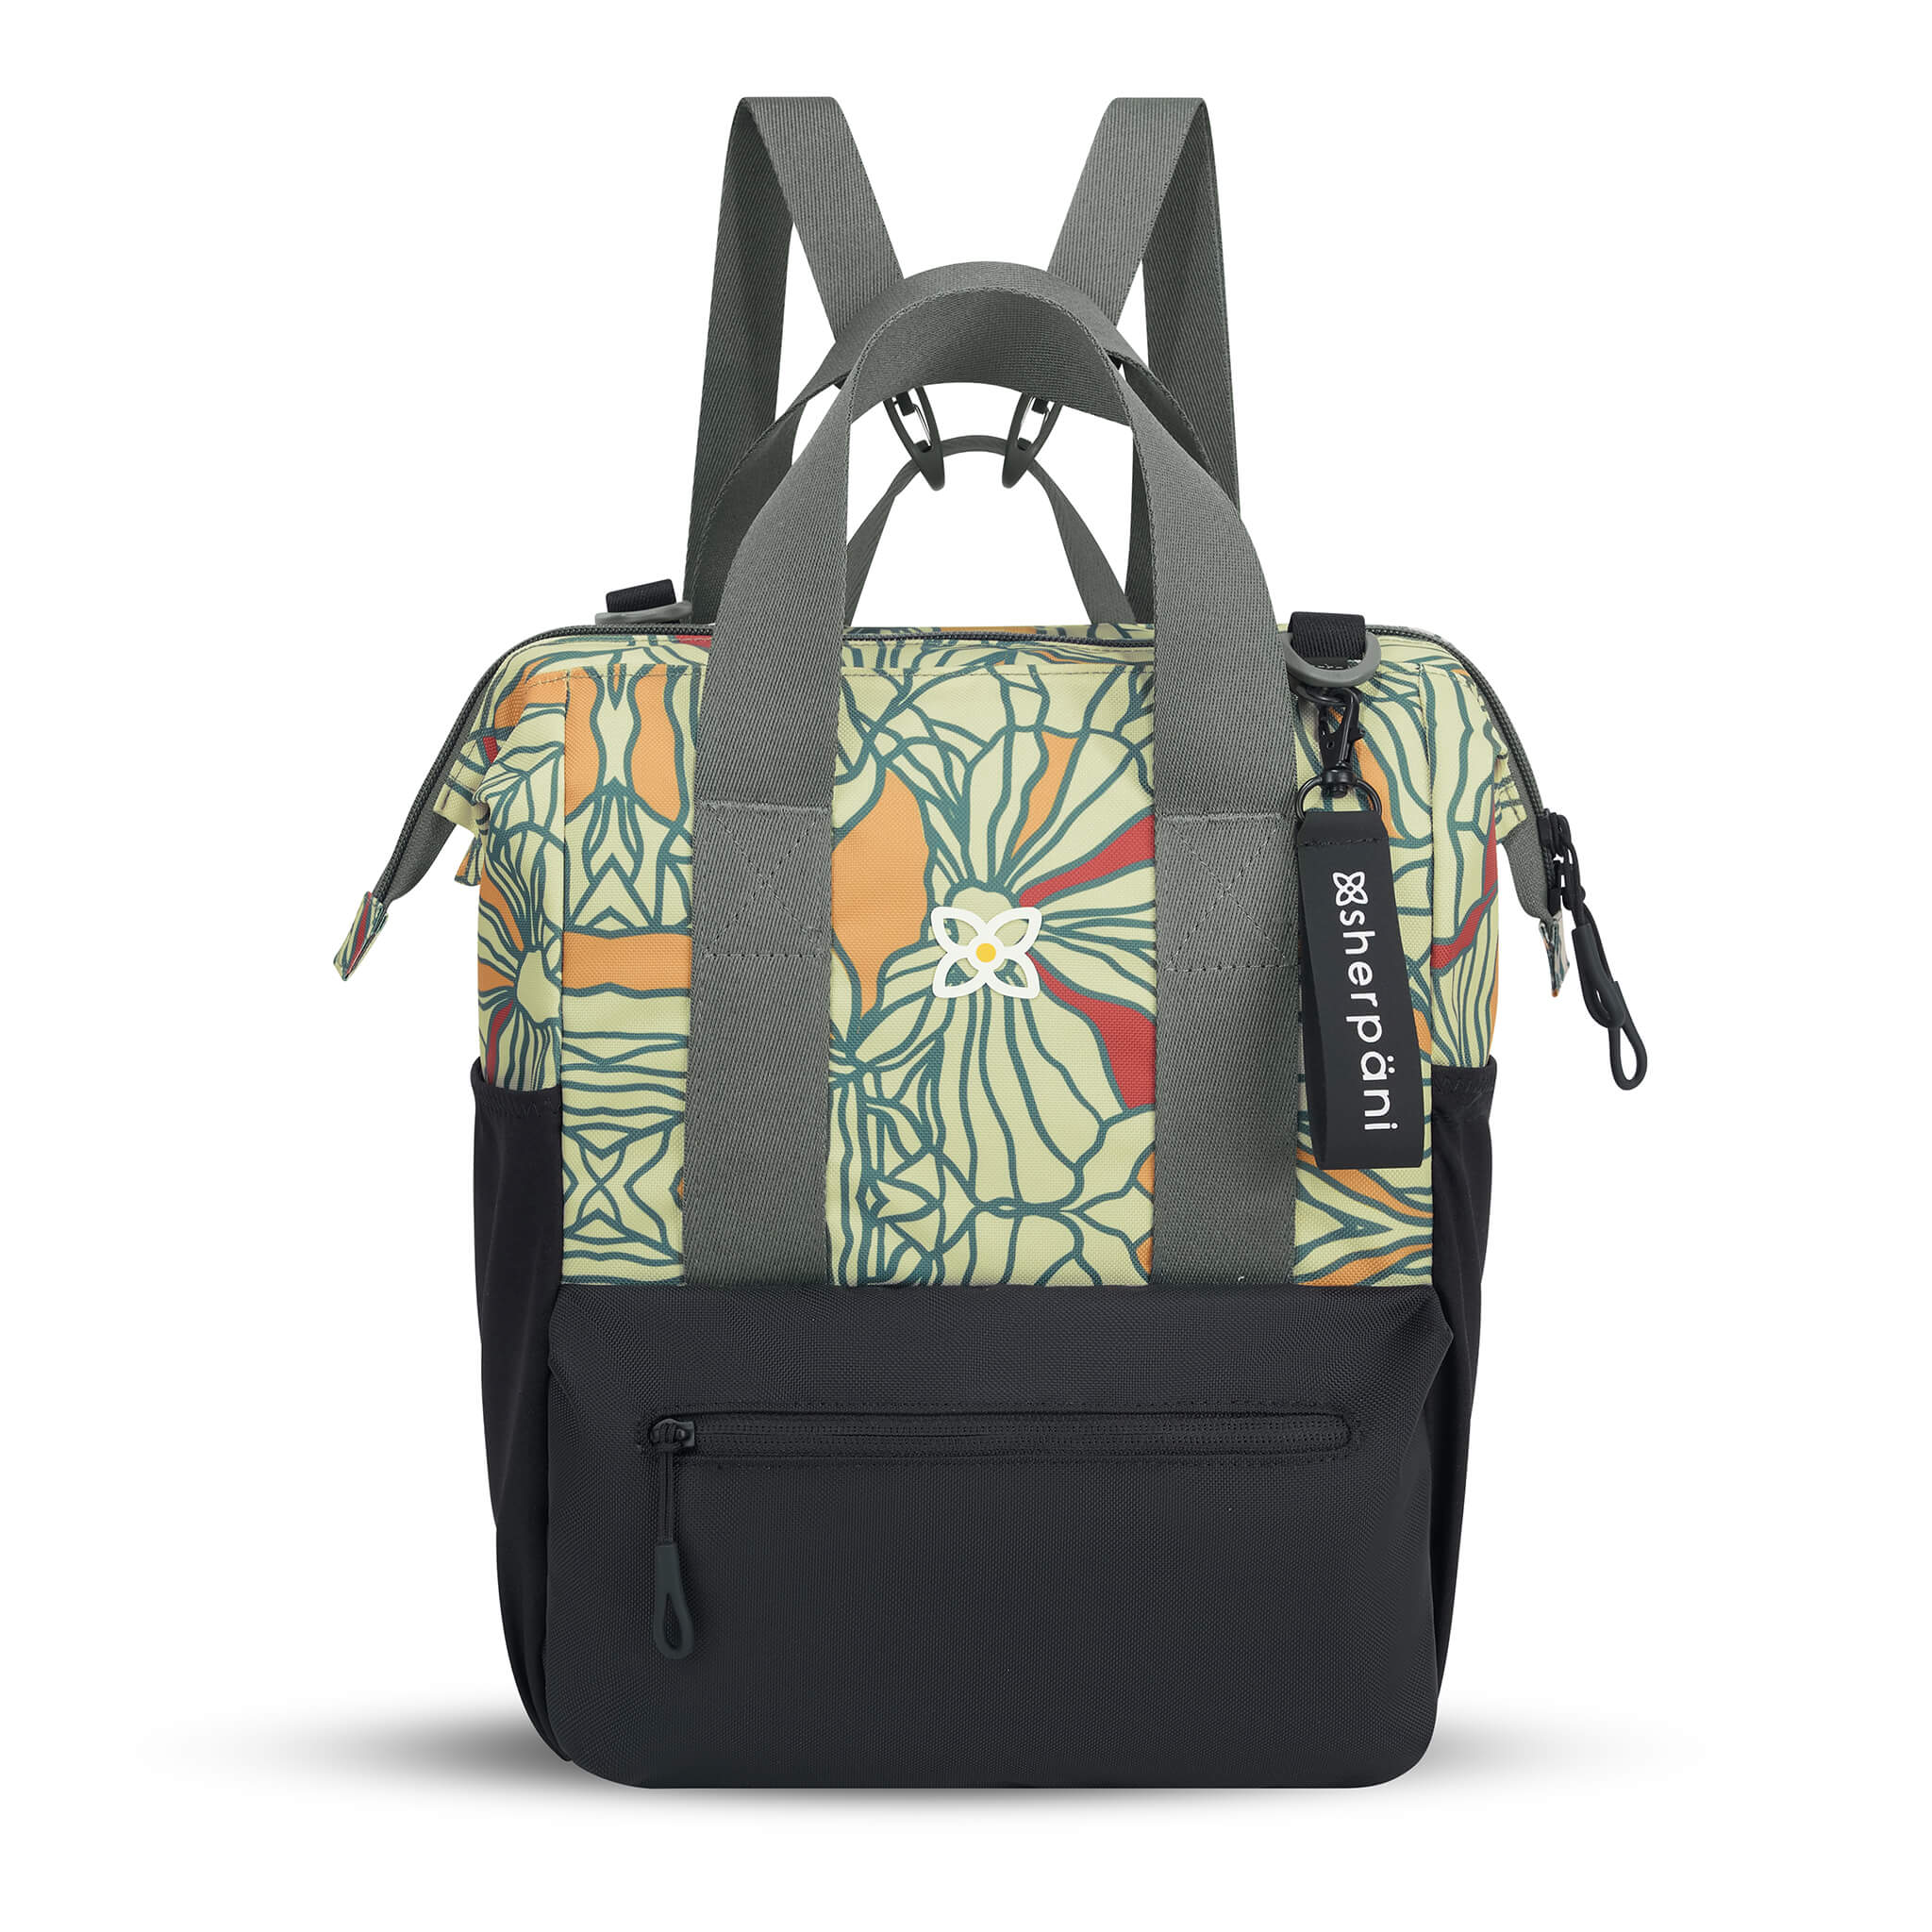 Flat front view of Sherpani convertible travel bag, the Dispatch in Fiori. Dispatch features include external zipper pocket, three water bottle holders, fixed tote handles, removable straps, detachable straps, adjustable straps, padded laptop sleeve and a doctor bag opening. The Fiori colorway is two-toned in black and a floral pattern with red accents. 